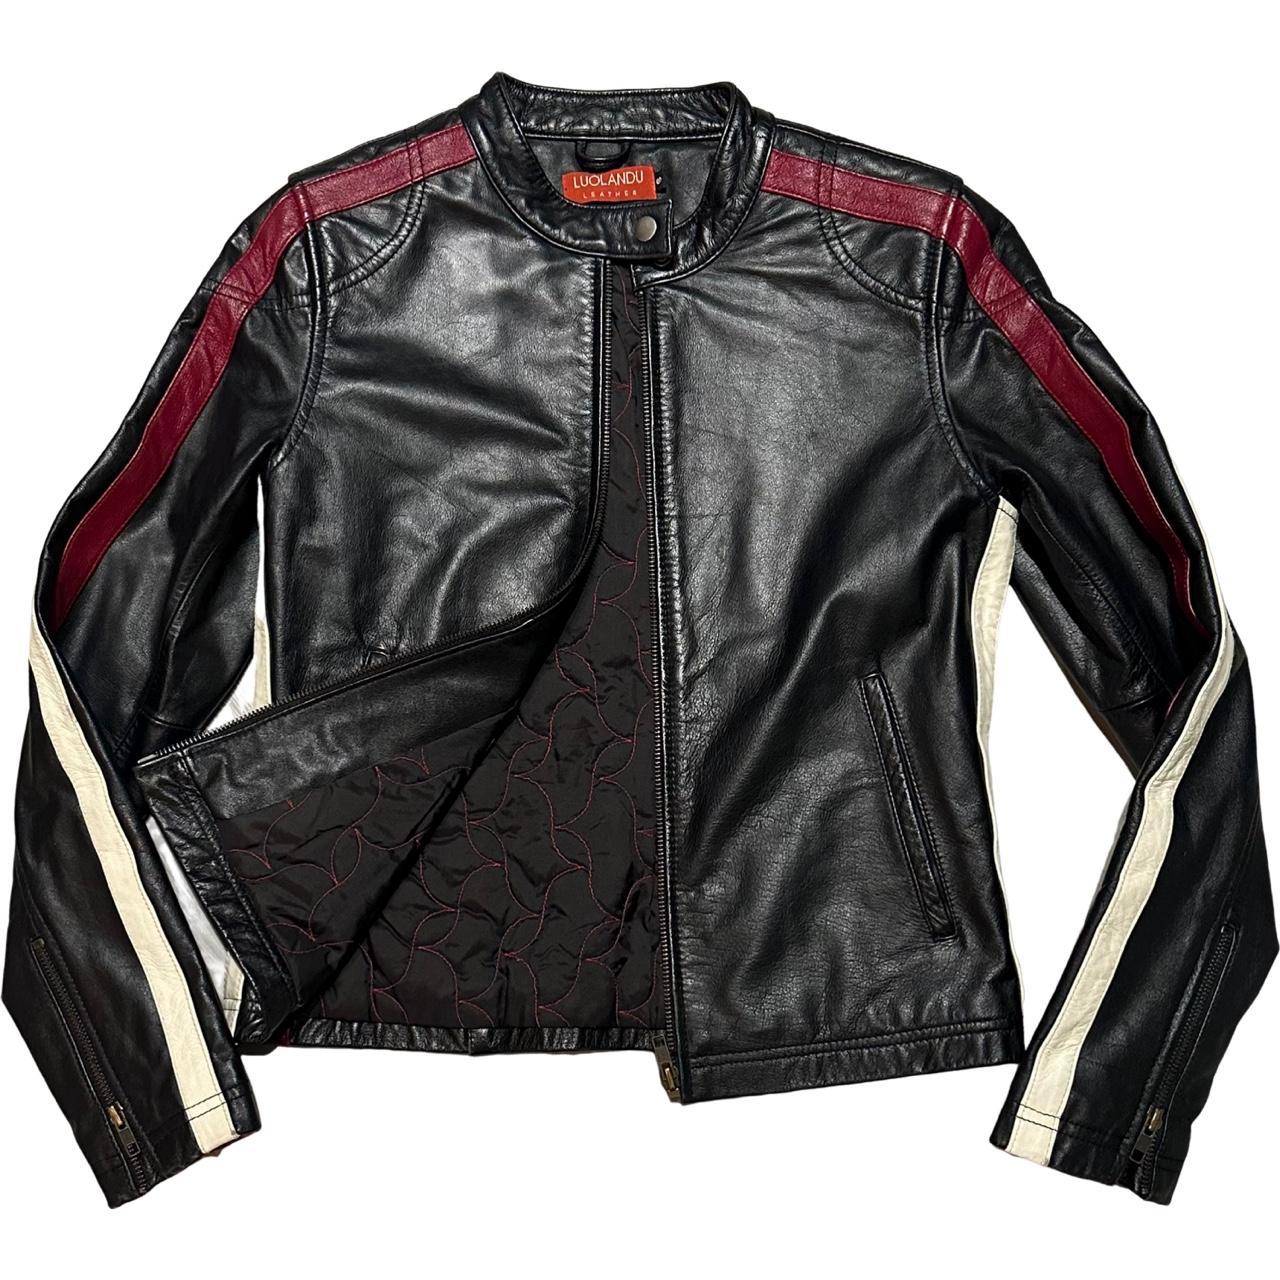 Leather Motor Cycle Jacket Withside stripe details